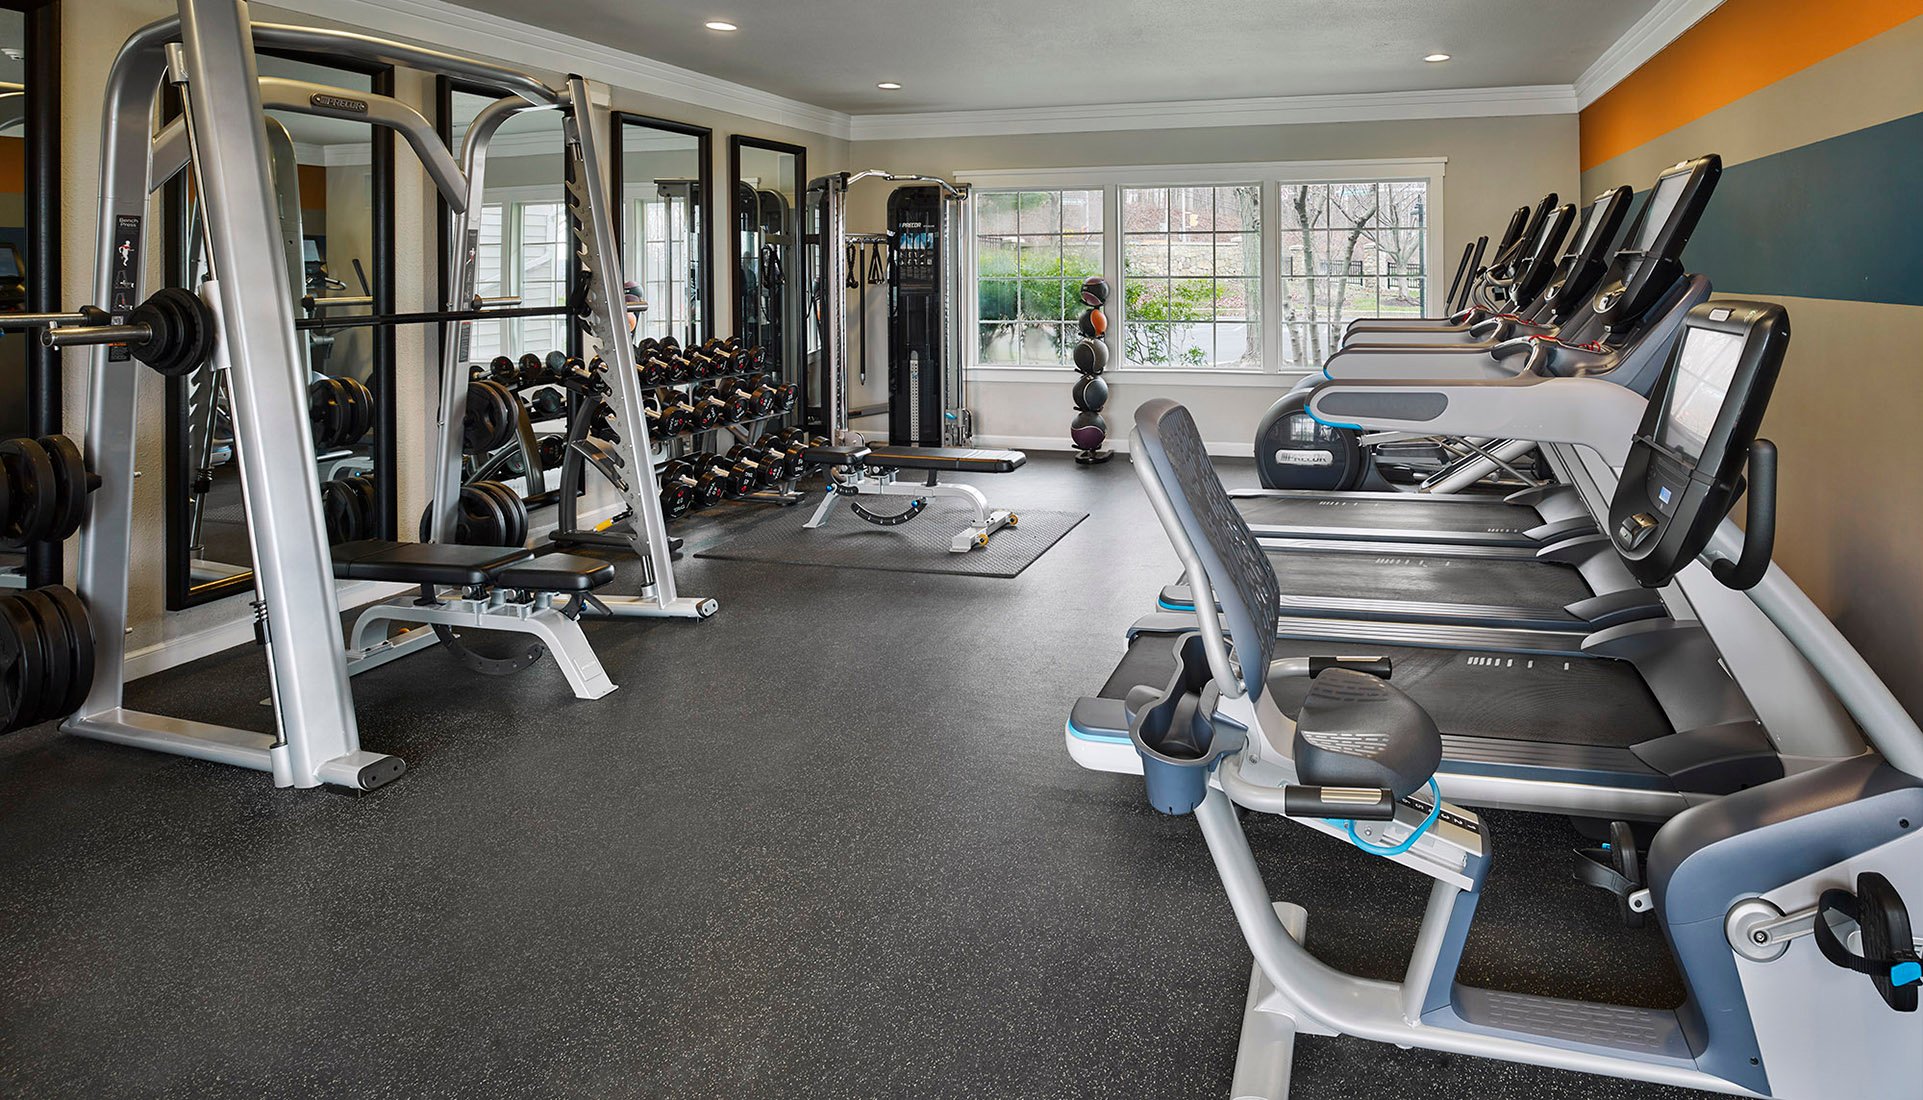 Fitness center with weight and cardio equipment